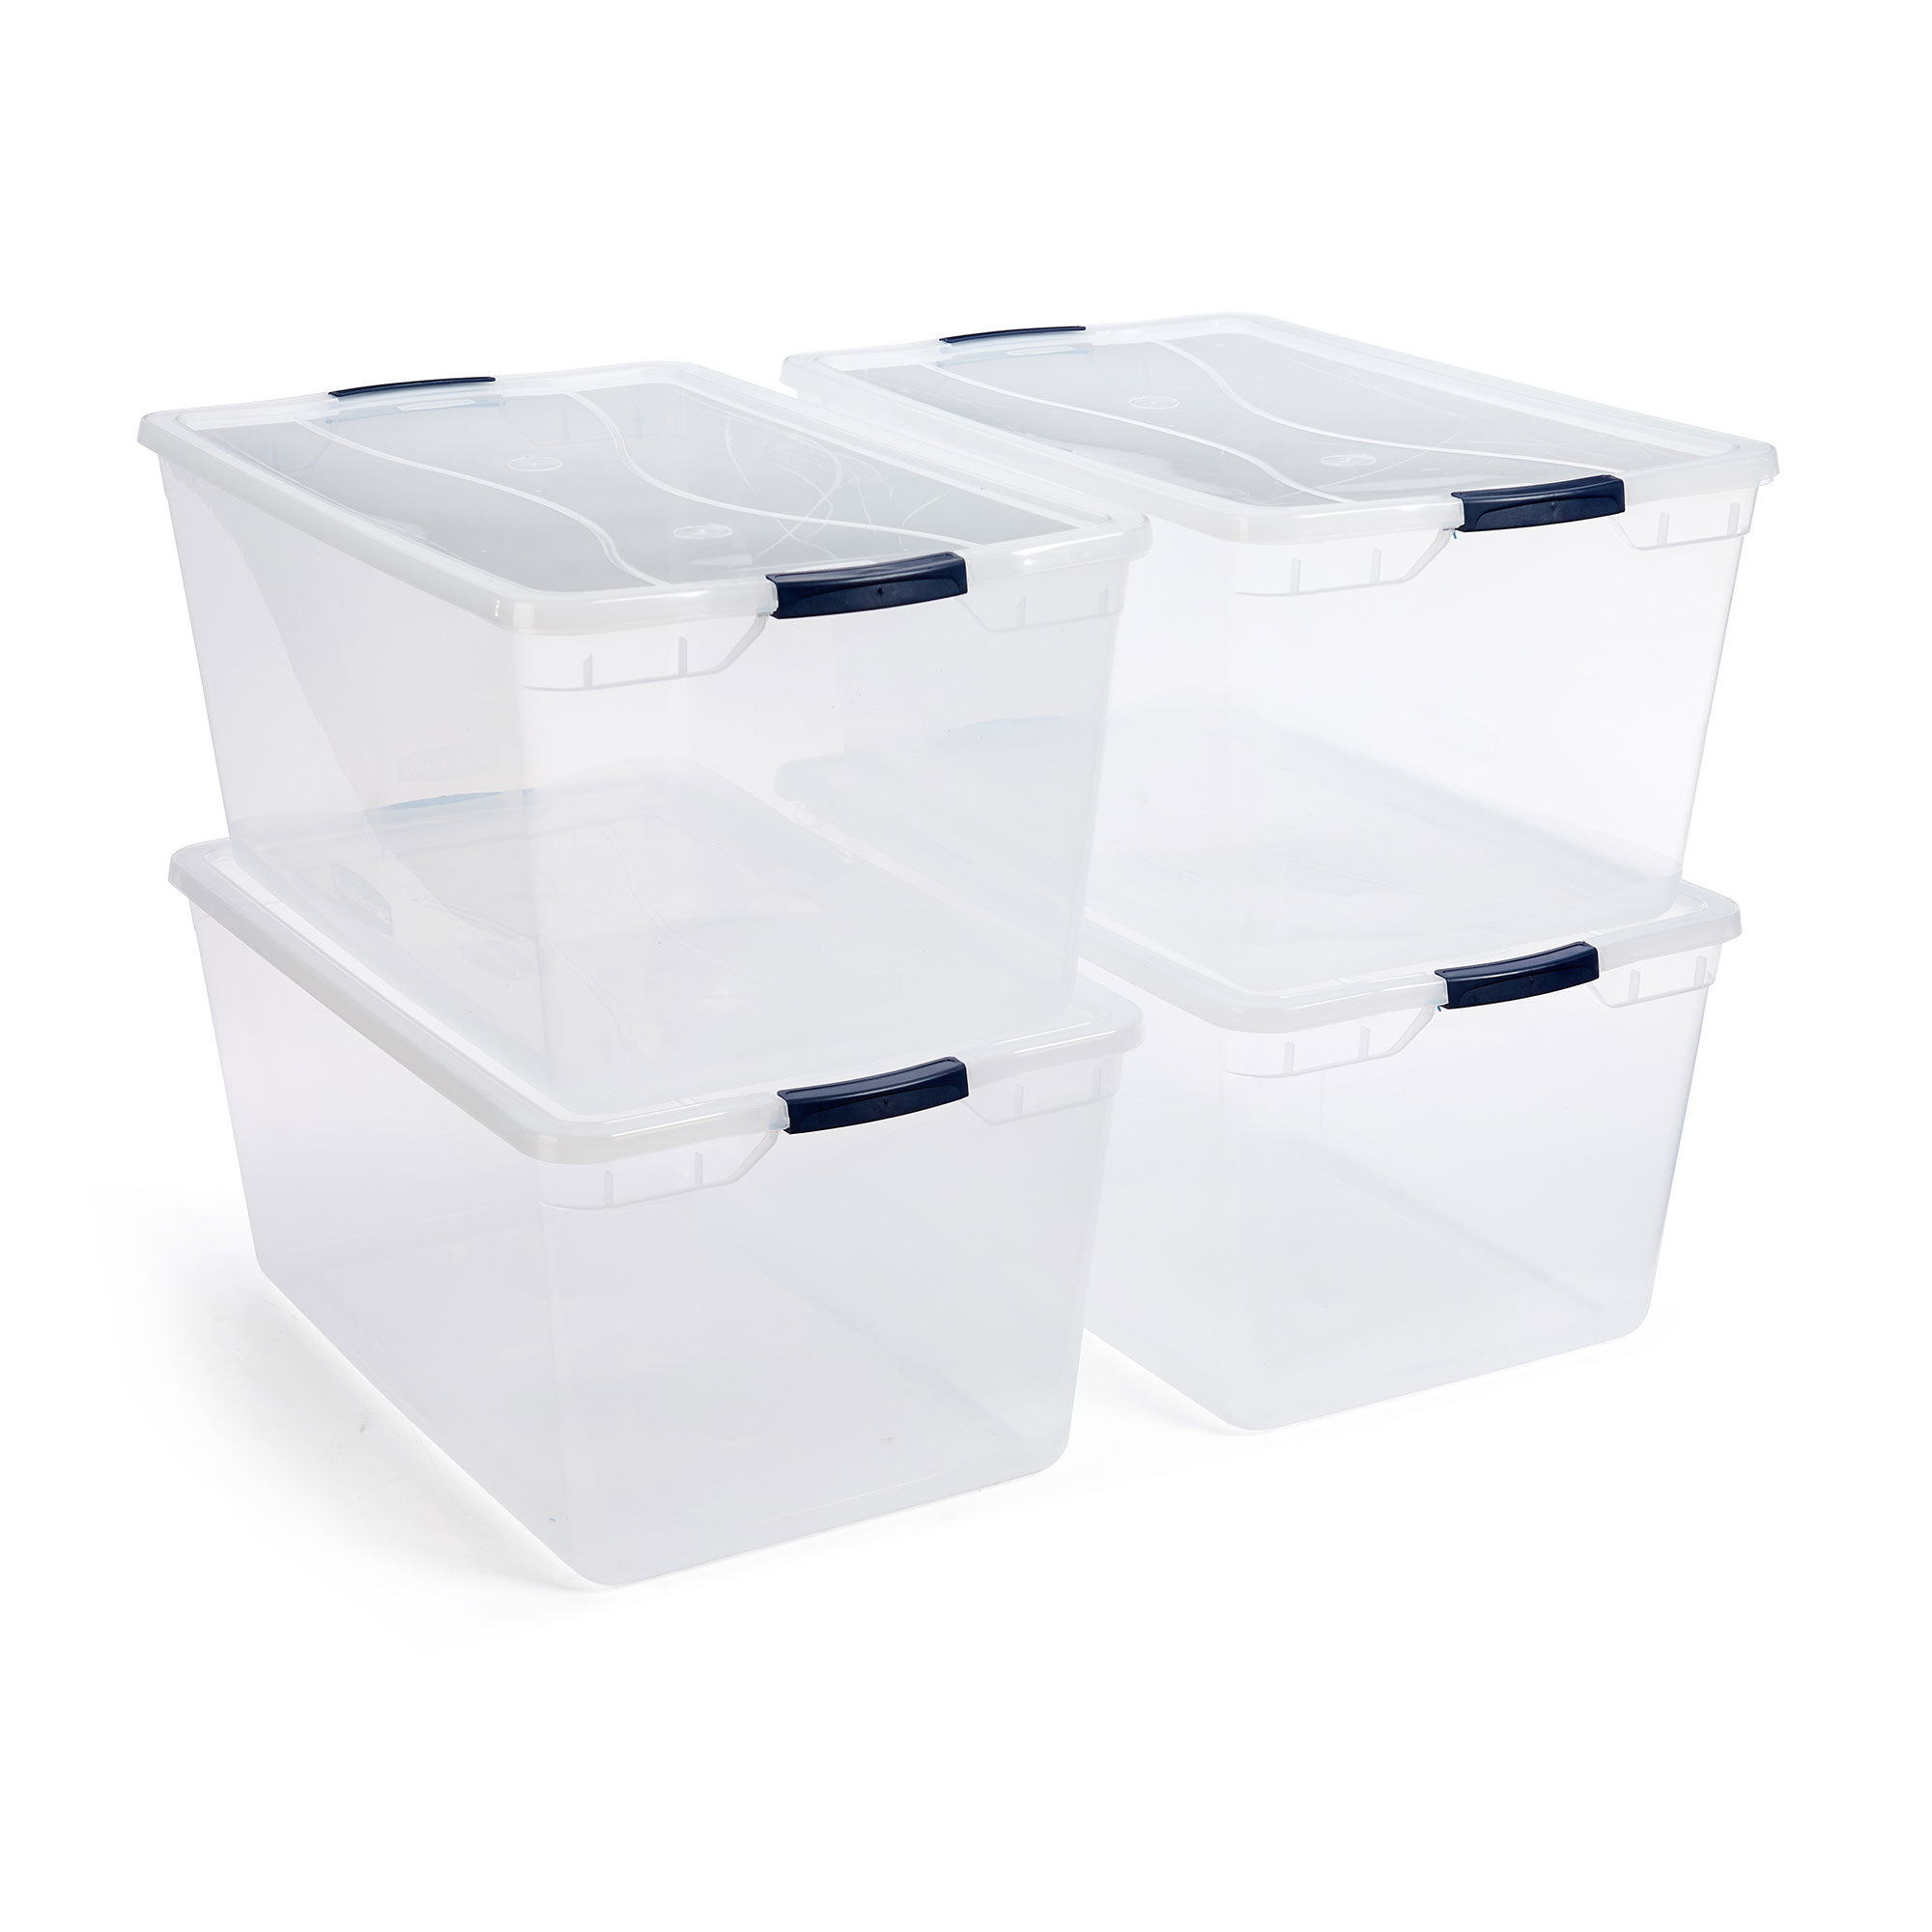 Rubbermaid Cleverstore 30 Quart Plastic Storage Tote Container w/ Lid (12  Pack), 1 Piece - Foods Co.